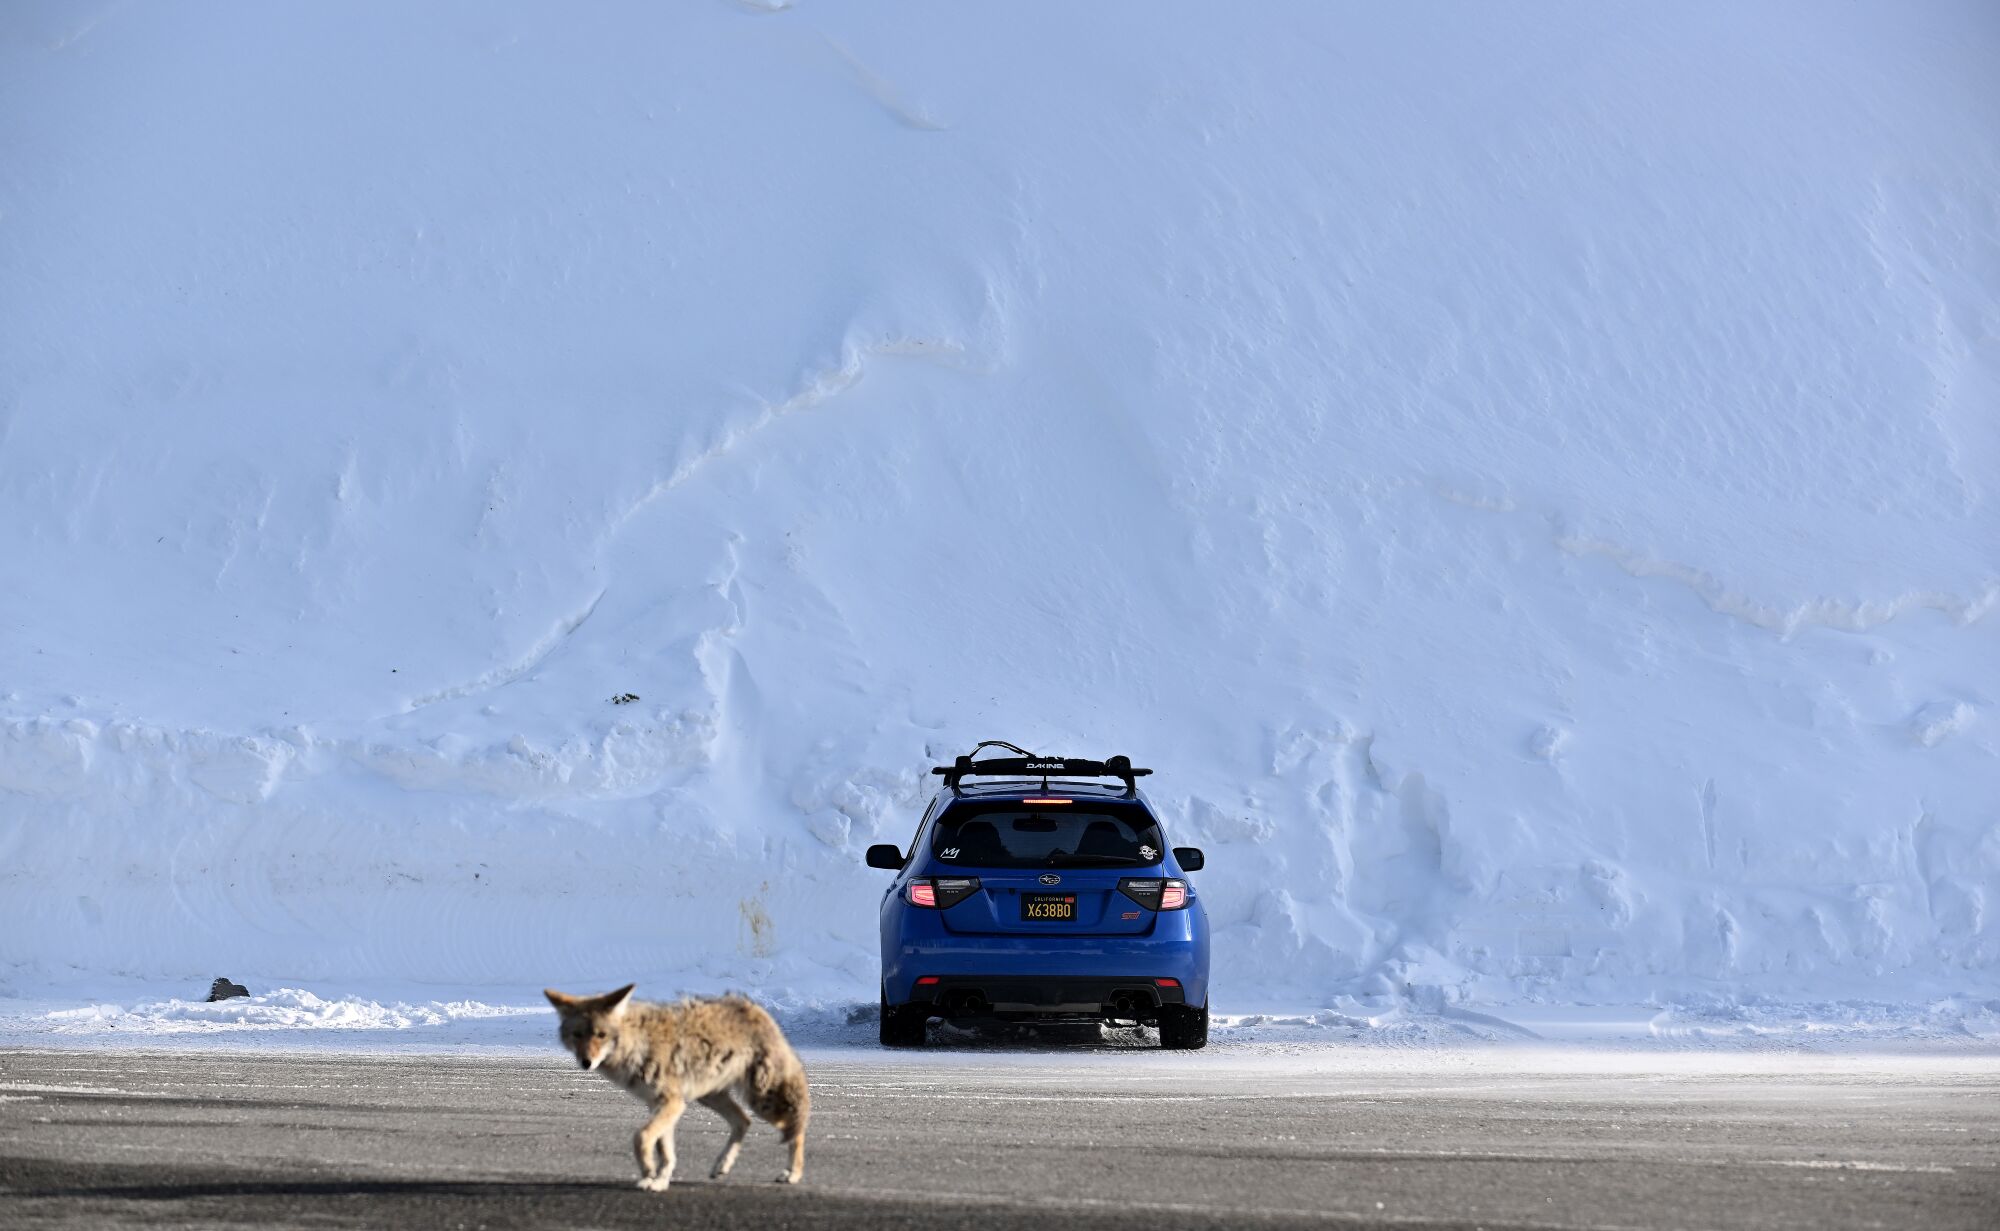 A wall of snow drawfs a car on Minaret Road near the Mammoth Mountain ski resort as a coyote roams across